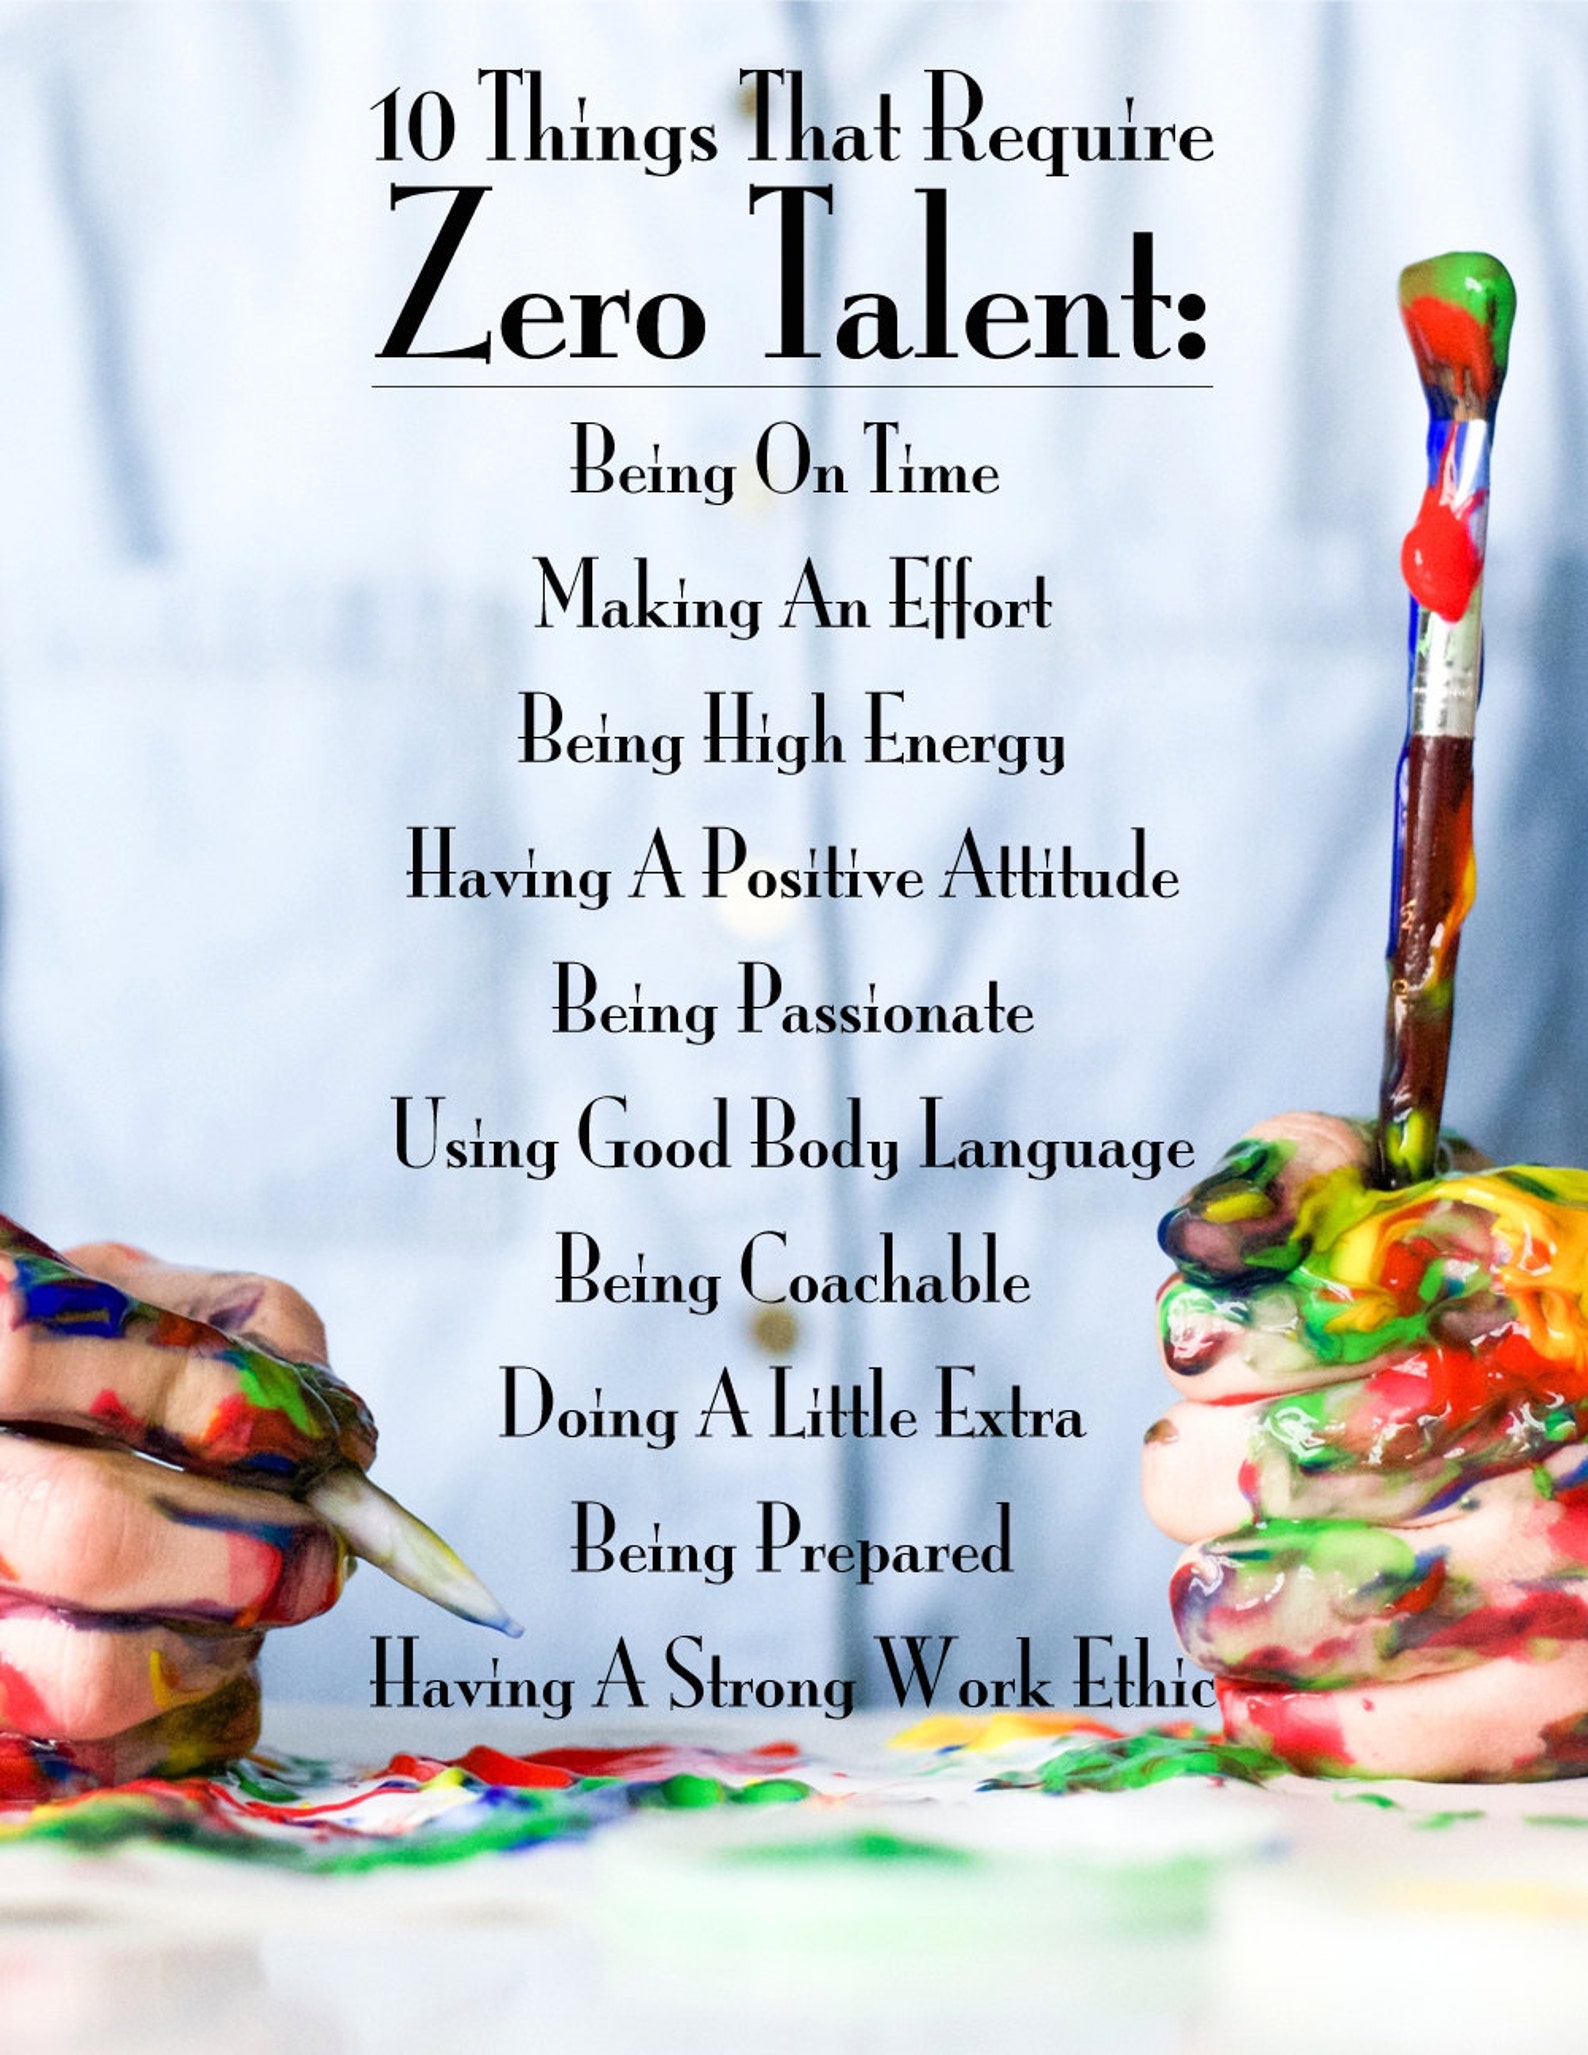 10 Things That Require Zero Talent, Inspirational Print, Motivational